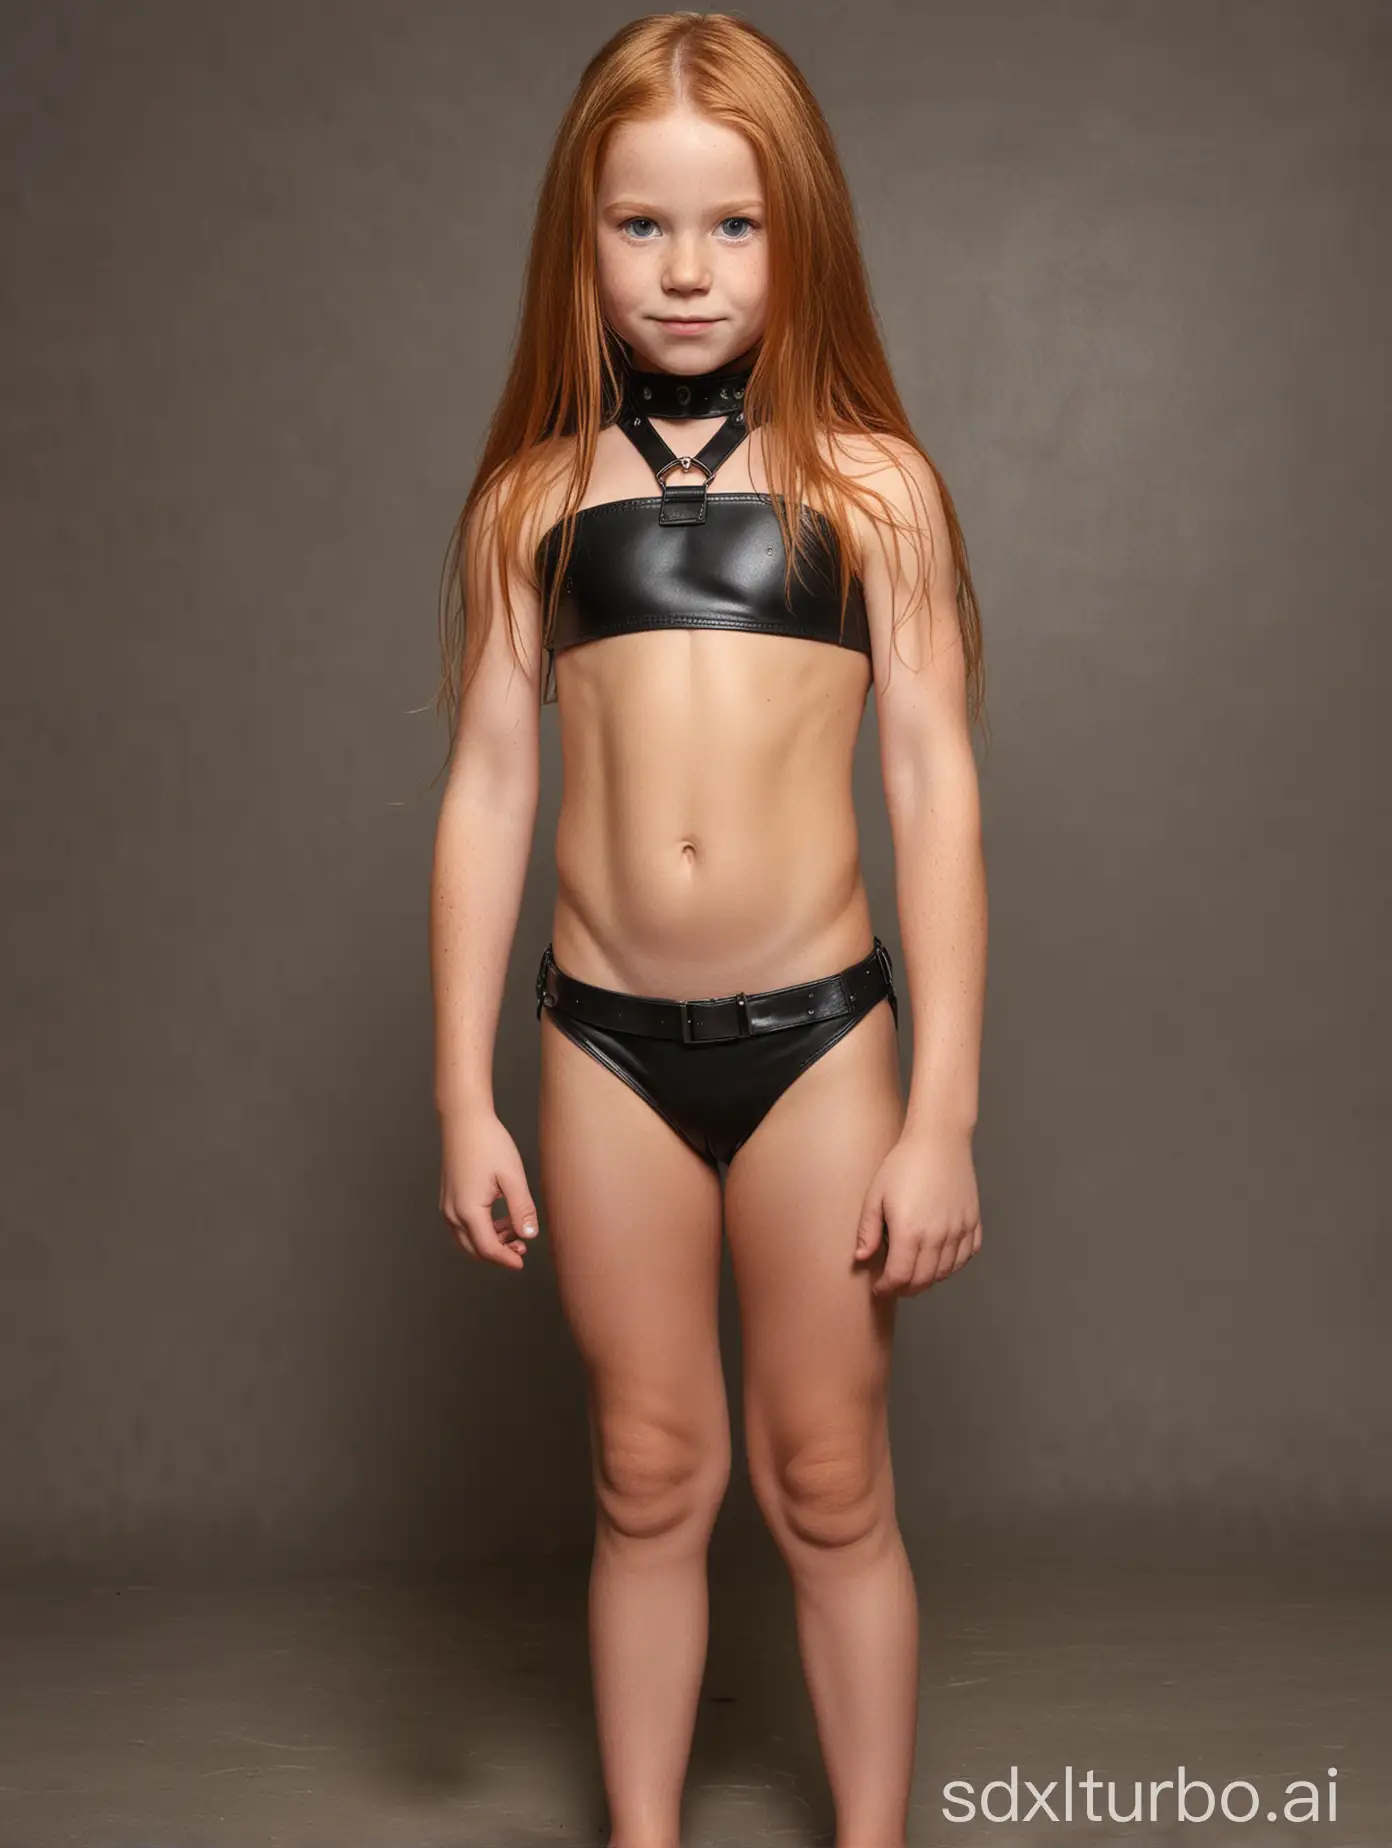 8 year old girl, leather bikini, choker, long ginger hair, exteremely muscular abs